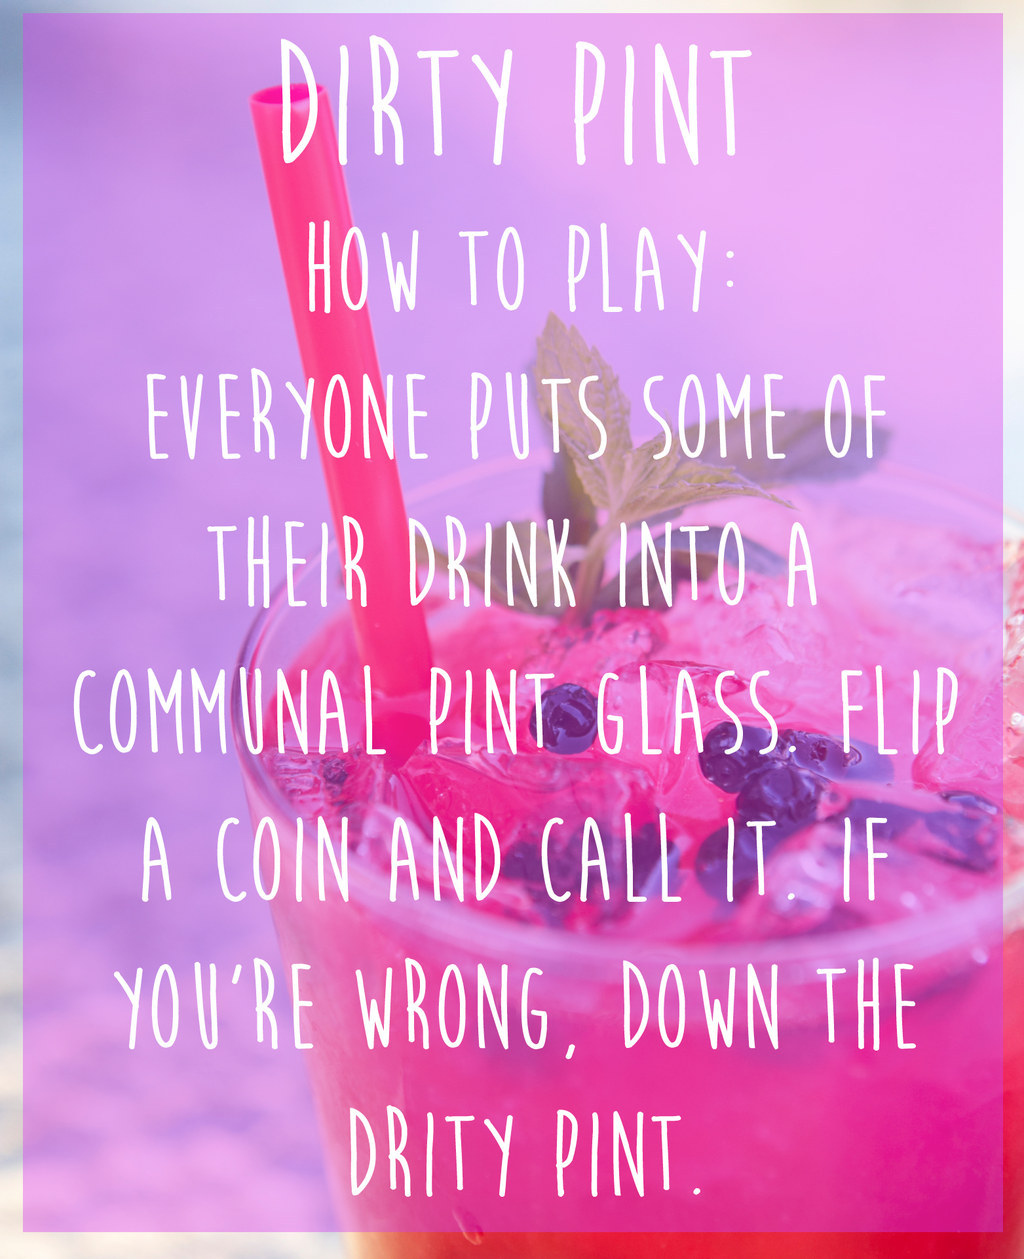 Dirty Pint drinking game